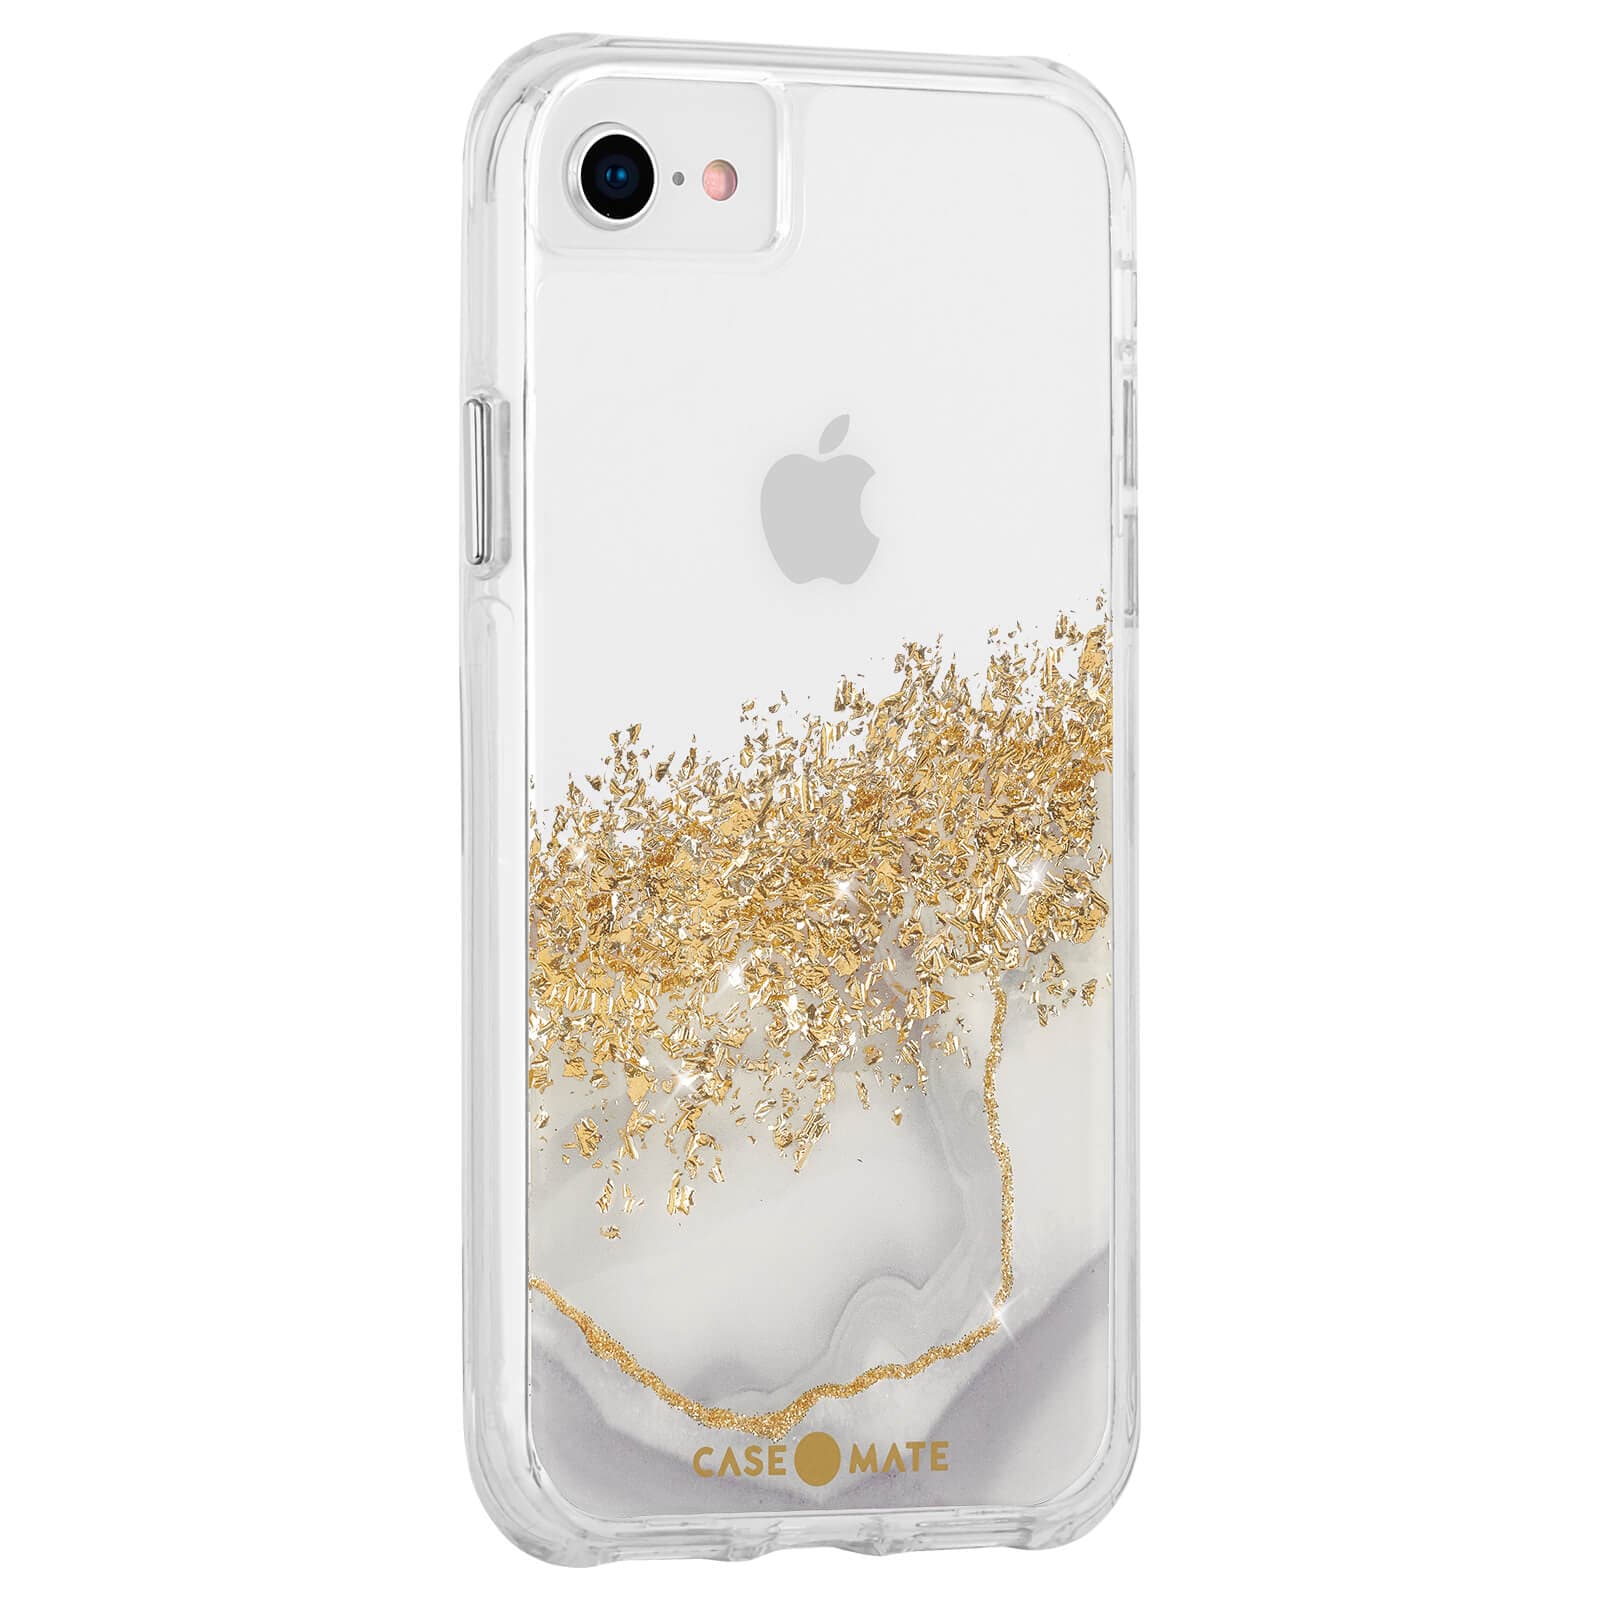 Marble and gold glitter case for iPhone SE. color::Karat Marble